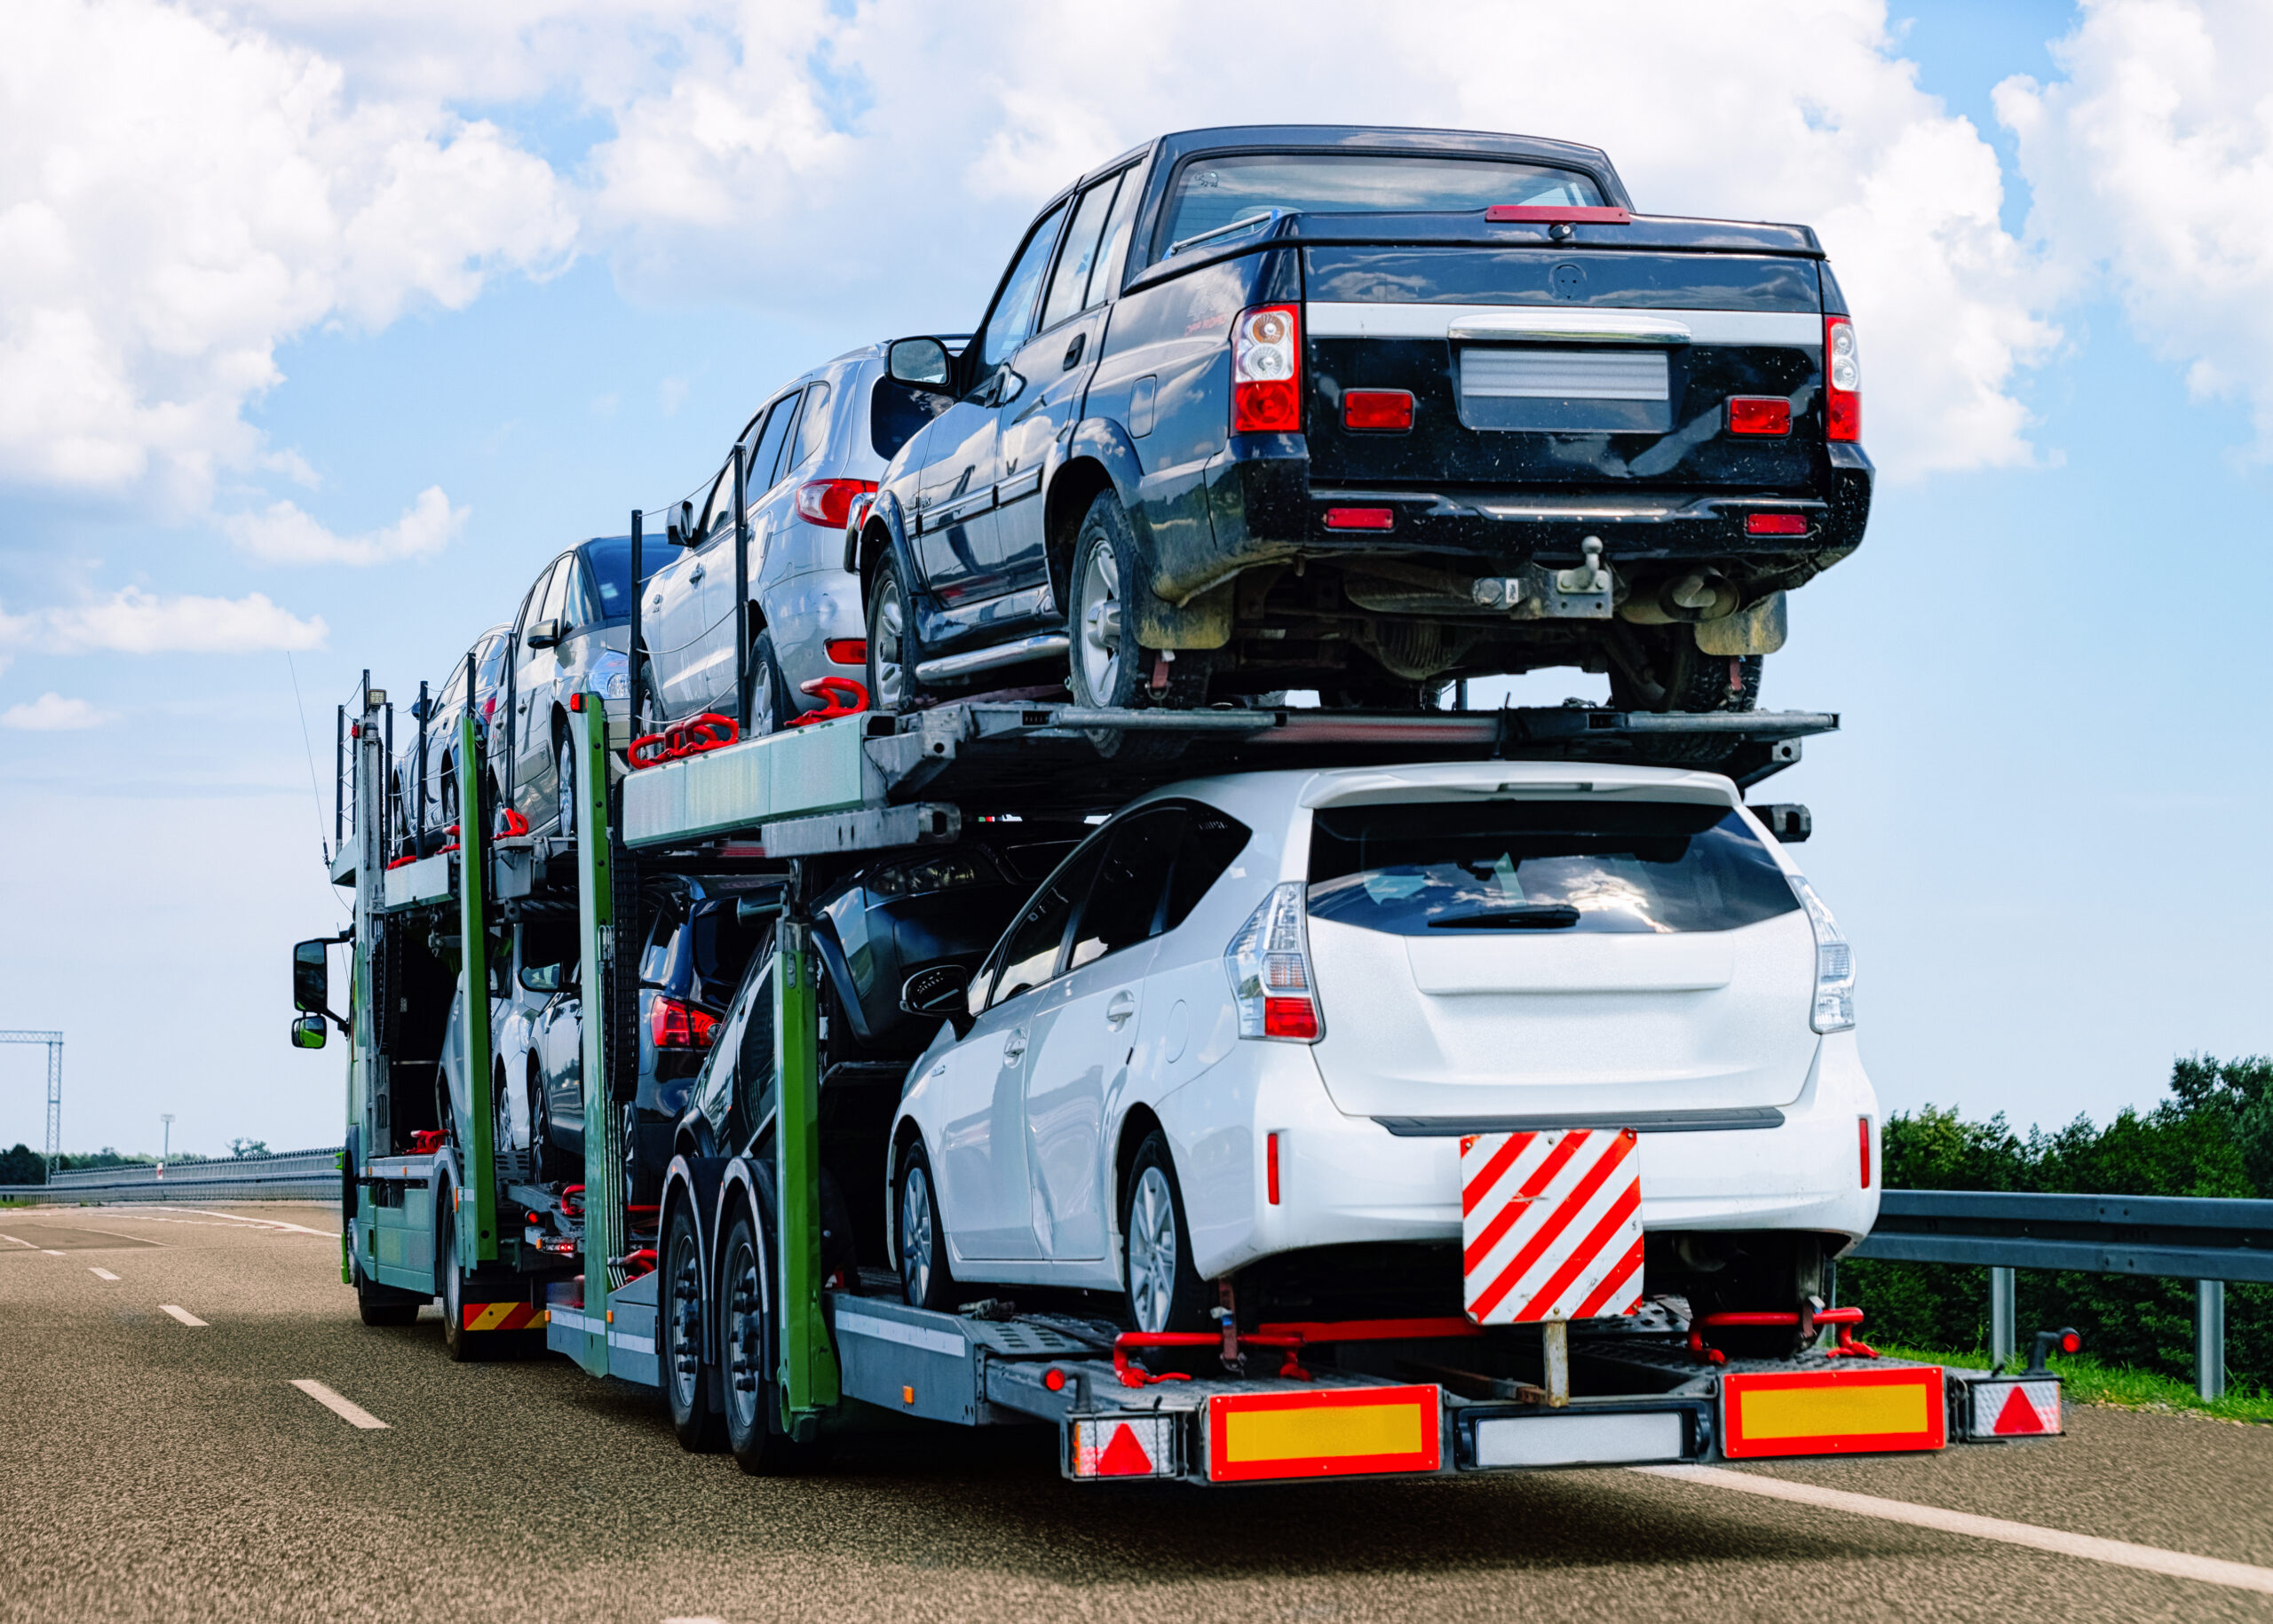 You are currently viewing Auto Transport Essentials: Your Guide to Vehicle Shipping Options, Costs, and Preparation